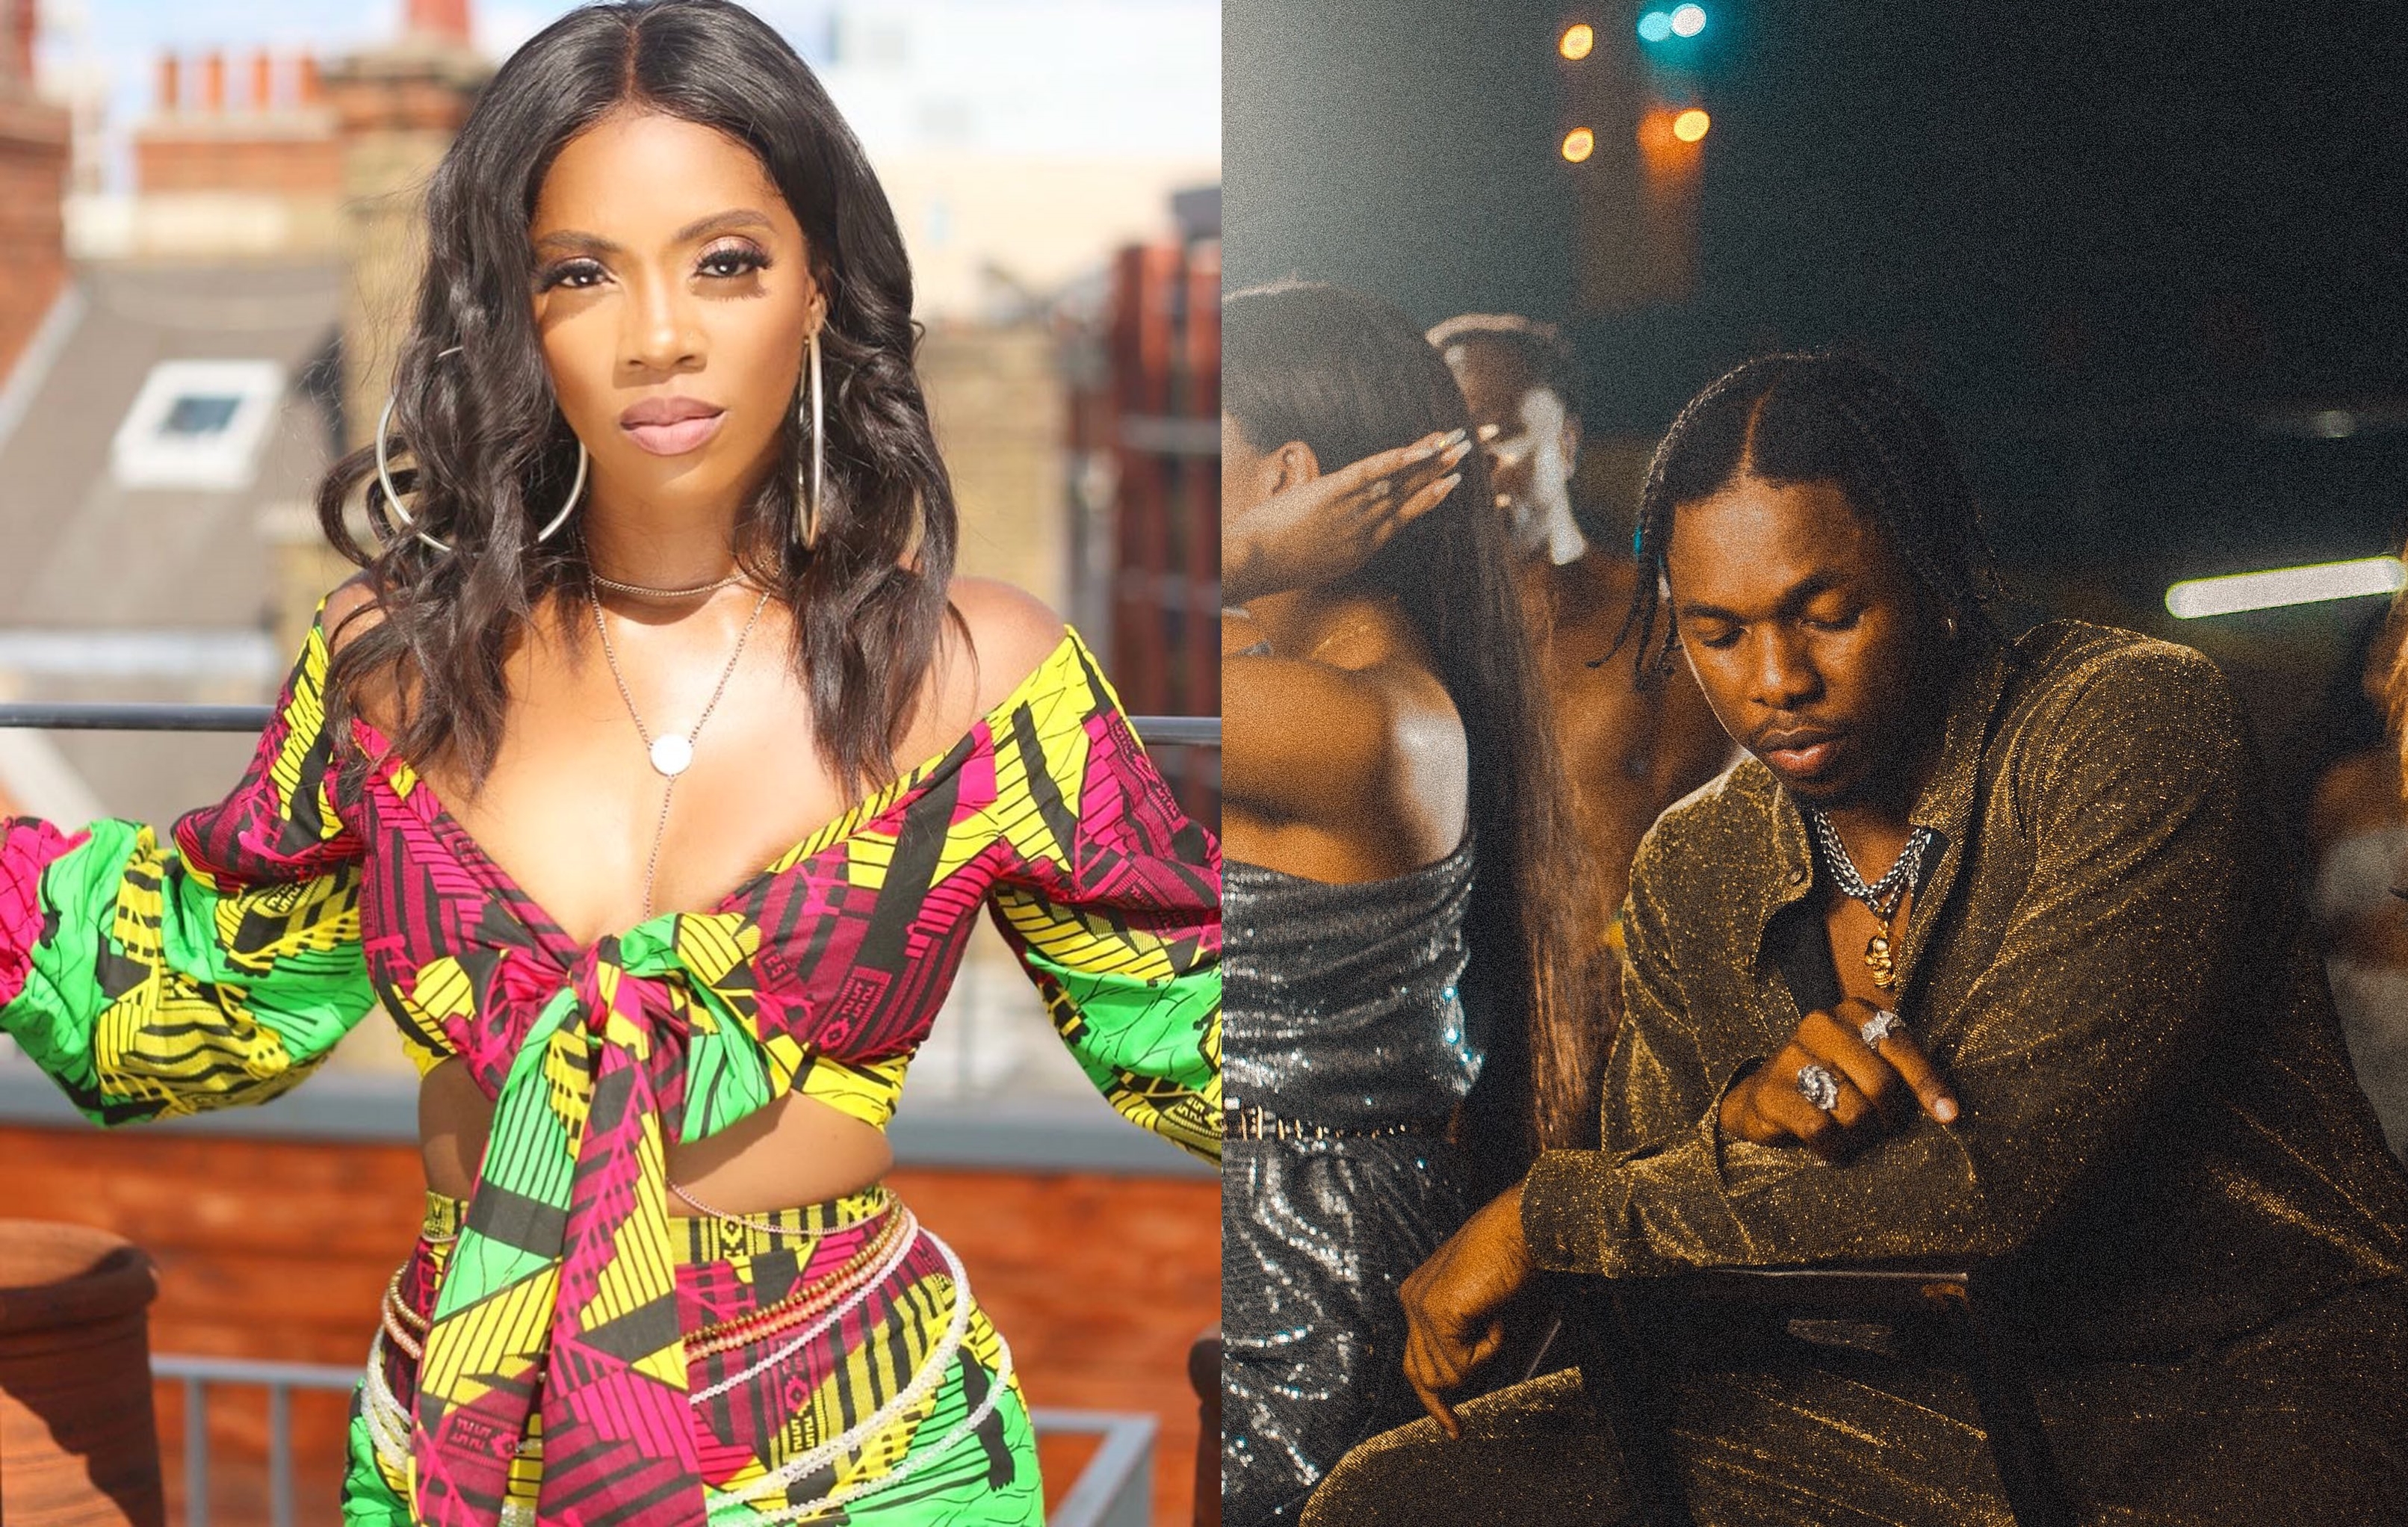 Nigerian Artists - Runtown & Tiwa Savage Are In The Country